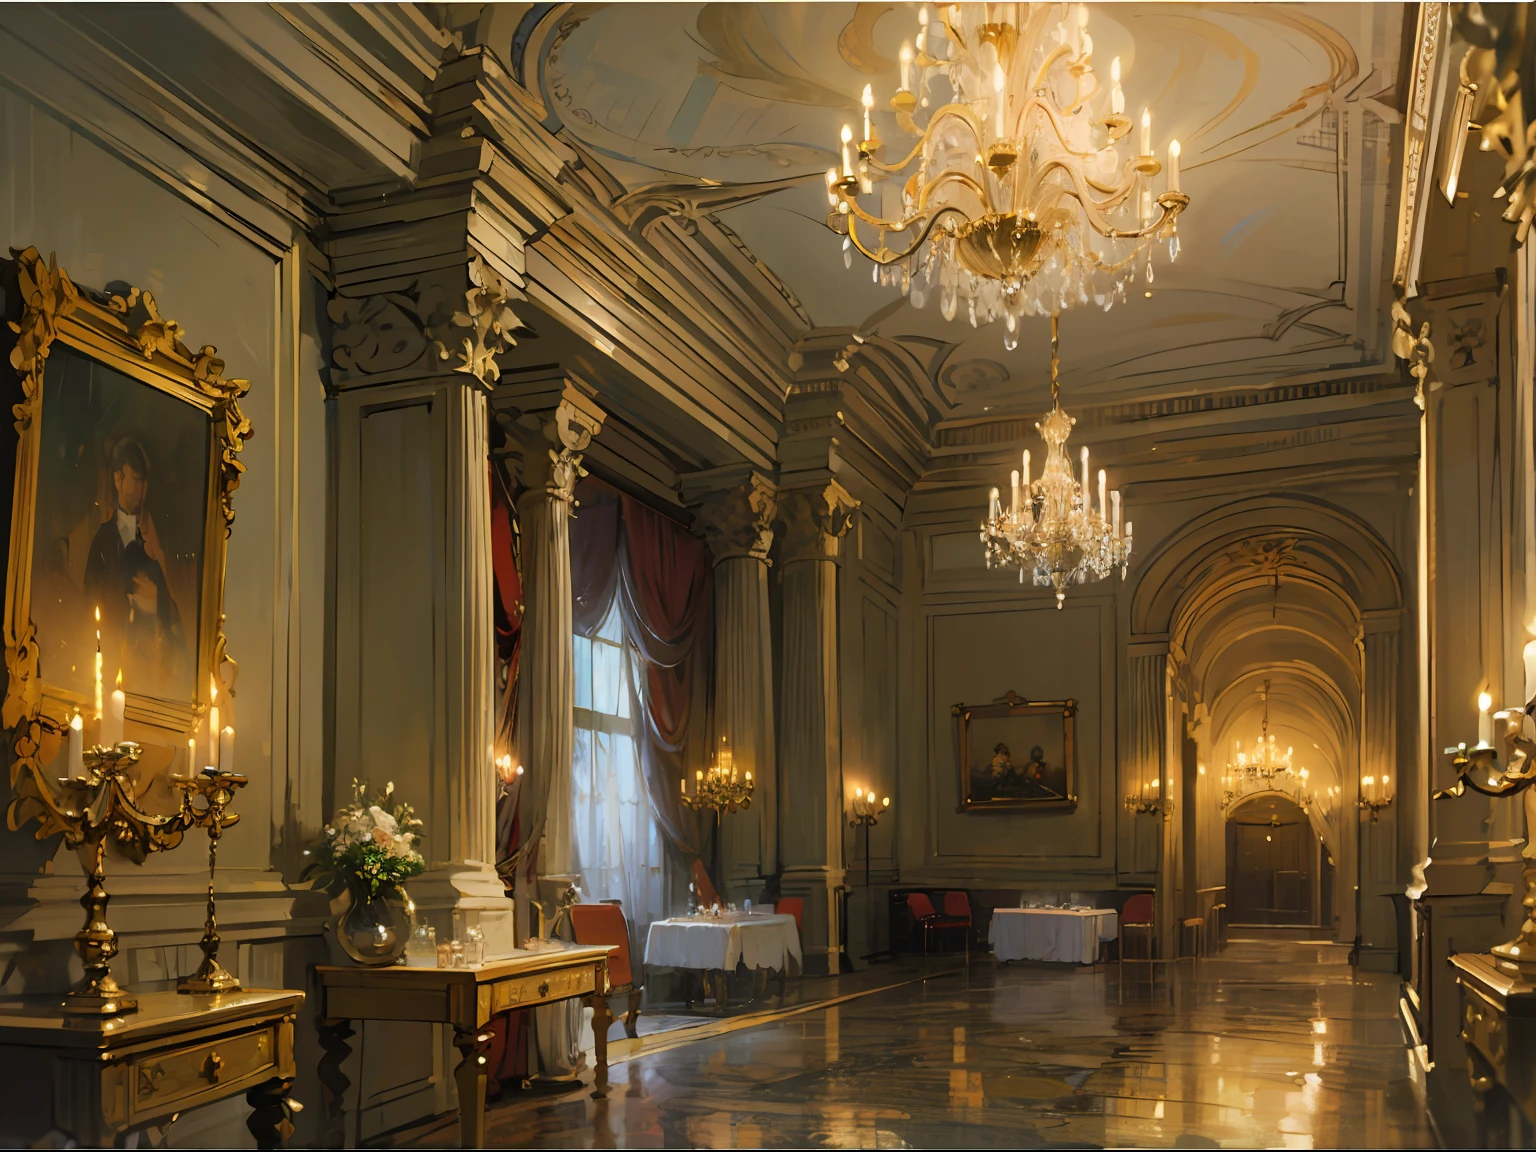 ((ballroom)), ((candle lights)), (columns), Chandeliers), (crystal), (Marble), (Gold Details), ((caracole)), (Curtains), (19th century), (Renoir), (many), (oil painting), (Sketch)